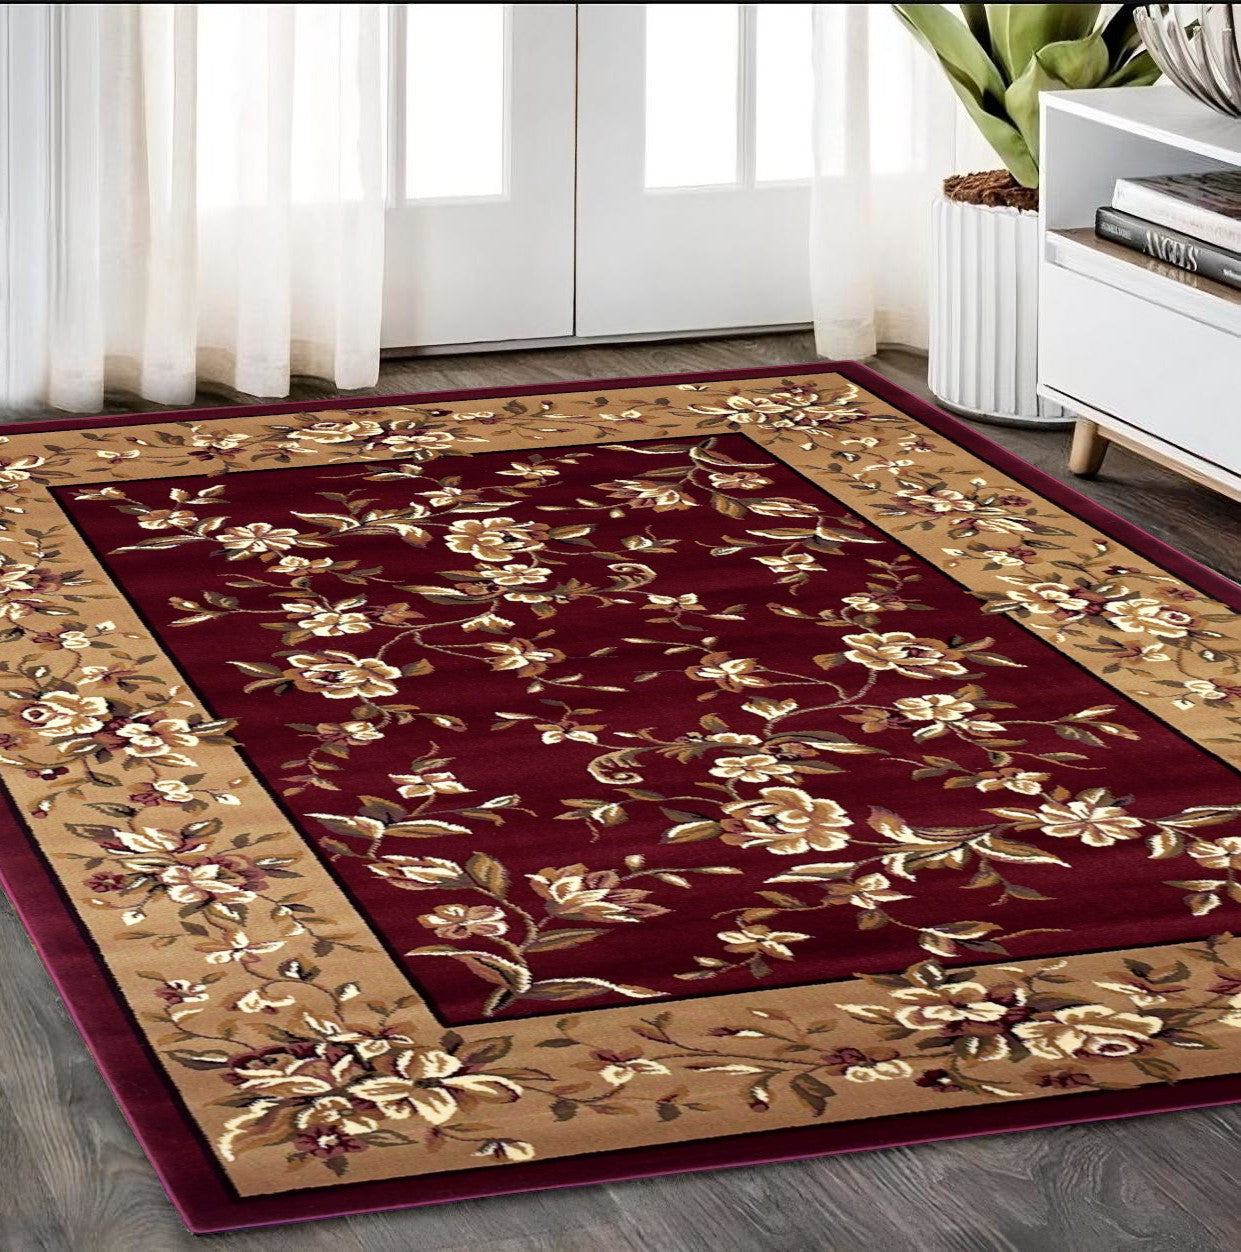 Red And Beige Octagon Floral Vines Area Rug